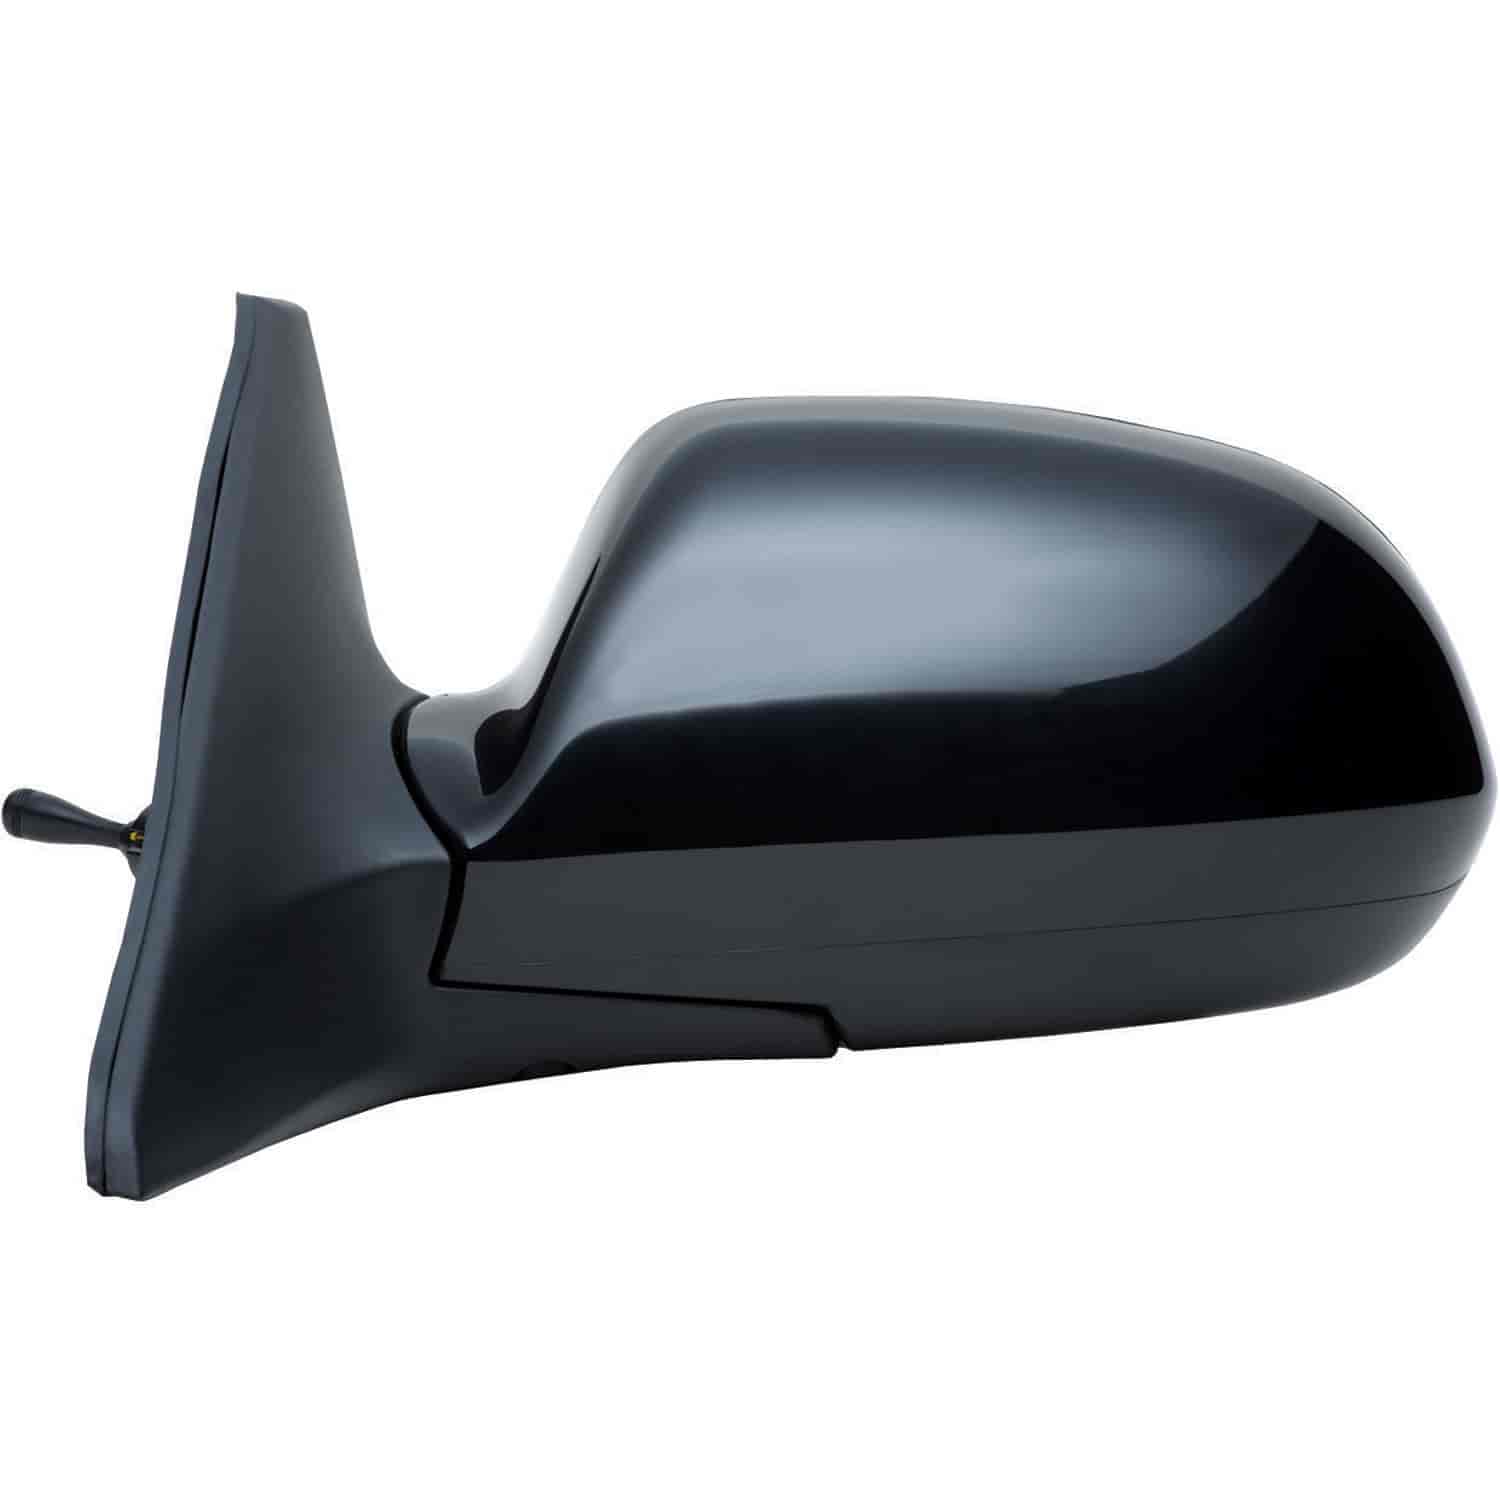 OEM Style Replacement mirror for 02-04 Kia Spectra driver side mirror tested to fit and function lik